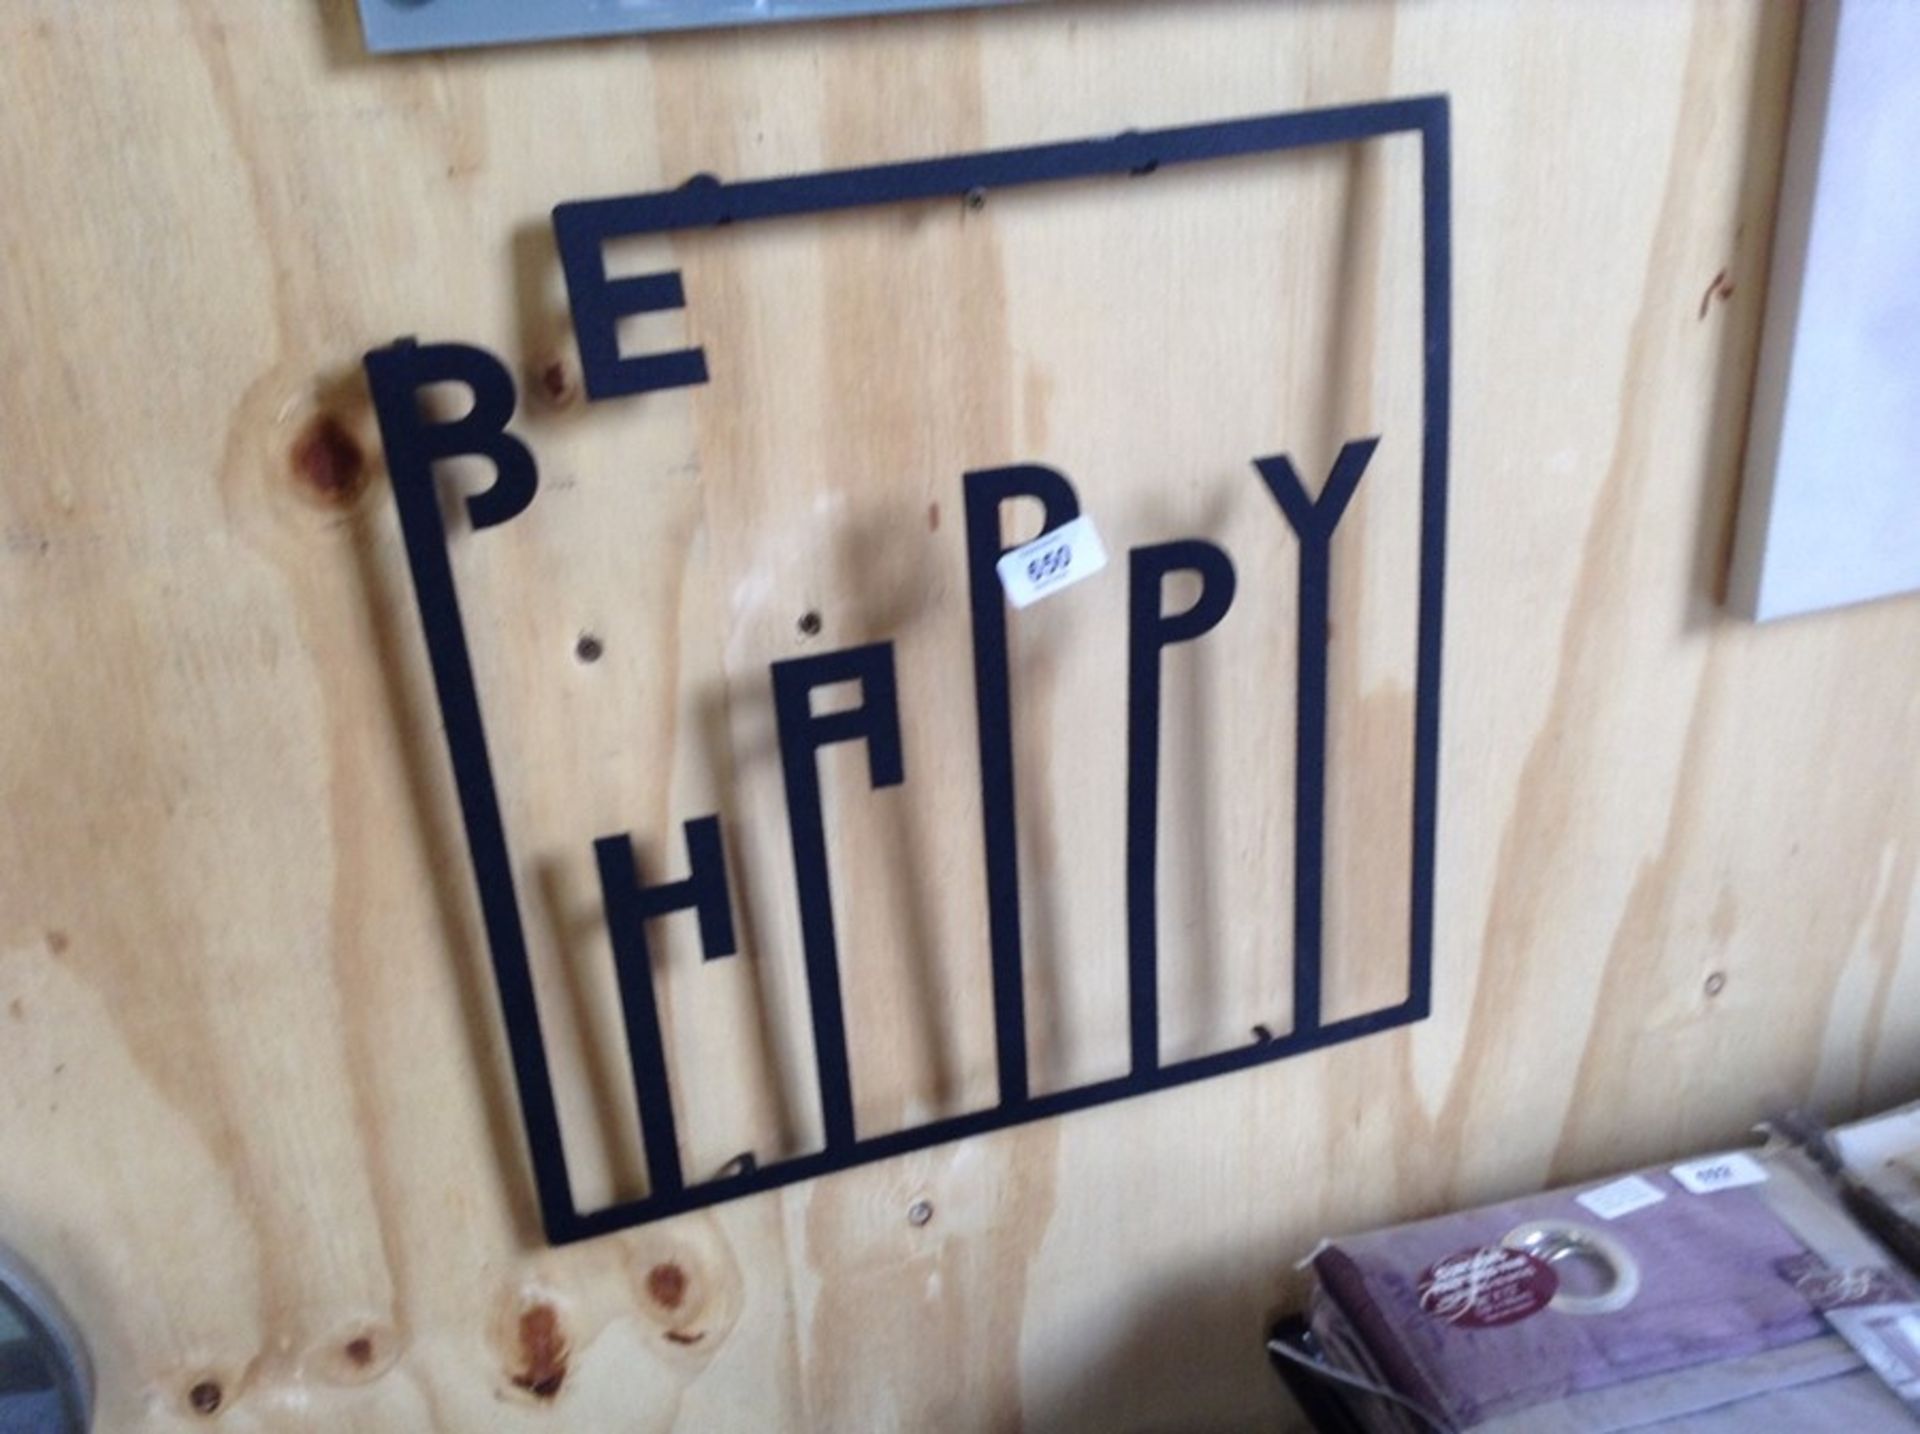 BE HAPPY SIGN